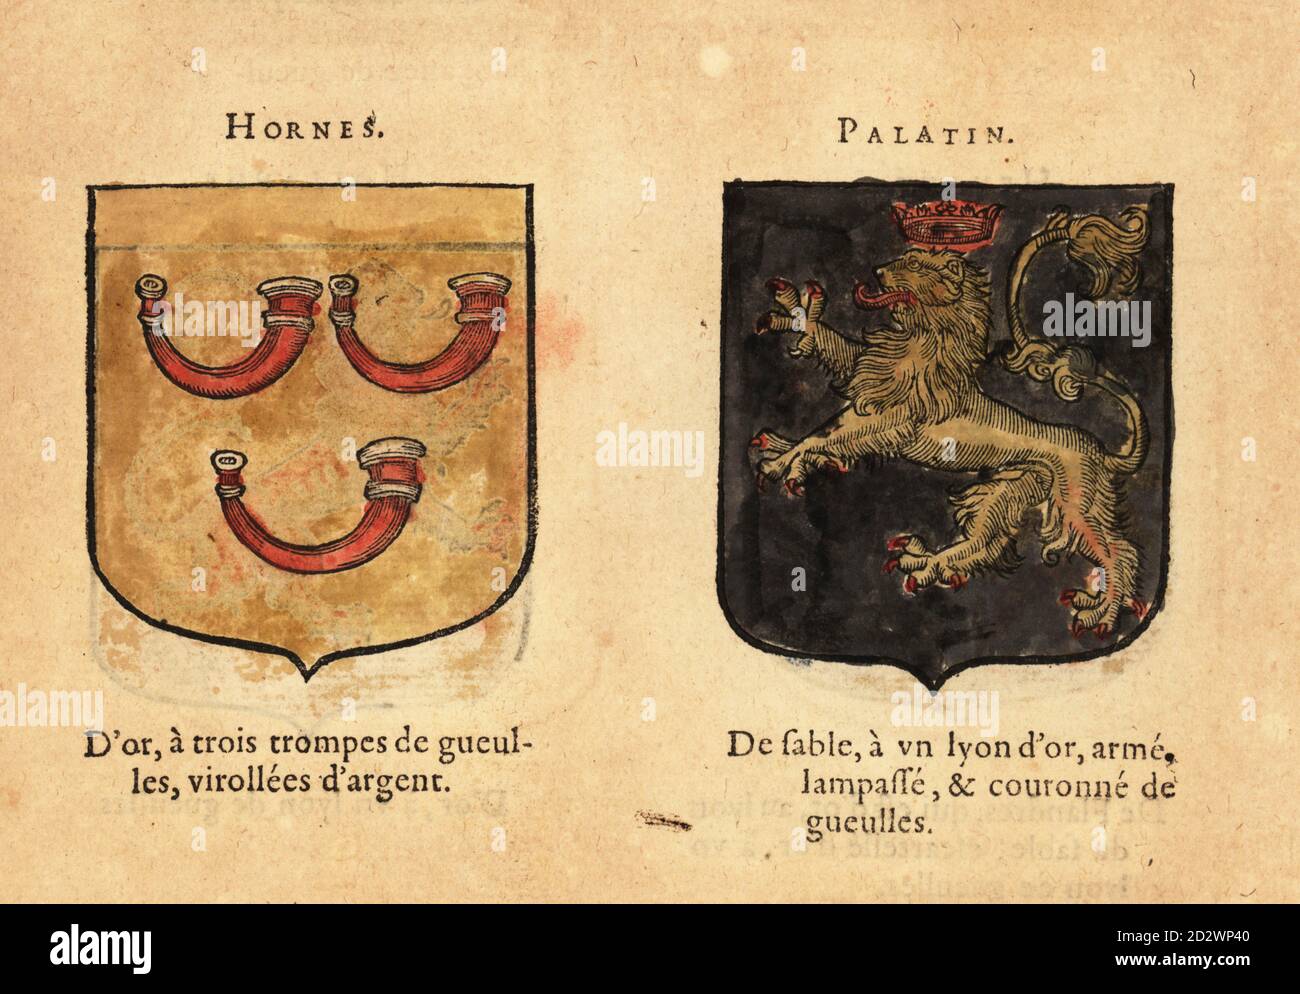 Coats of arms of the Count of Horne, with three red trumpets on gold field, and the Count of Palatine of the Rhine, with gold lion and red crown on black field. Comtez: Hornes, Palatin. Handcoloured woodblock engraving from Hierosme de Bara’s Le Blason des Armoiries, Chez Rolet Boutonne, Paris, 1628 Stock Photo